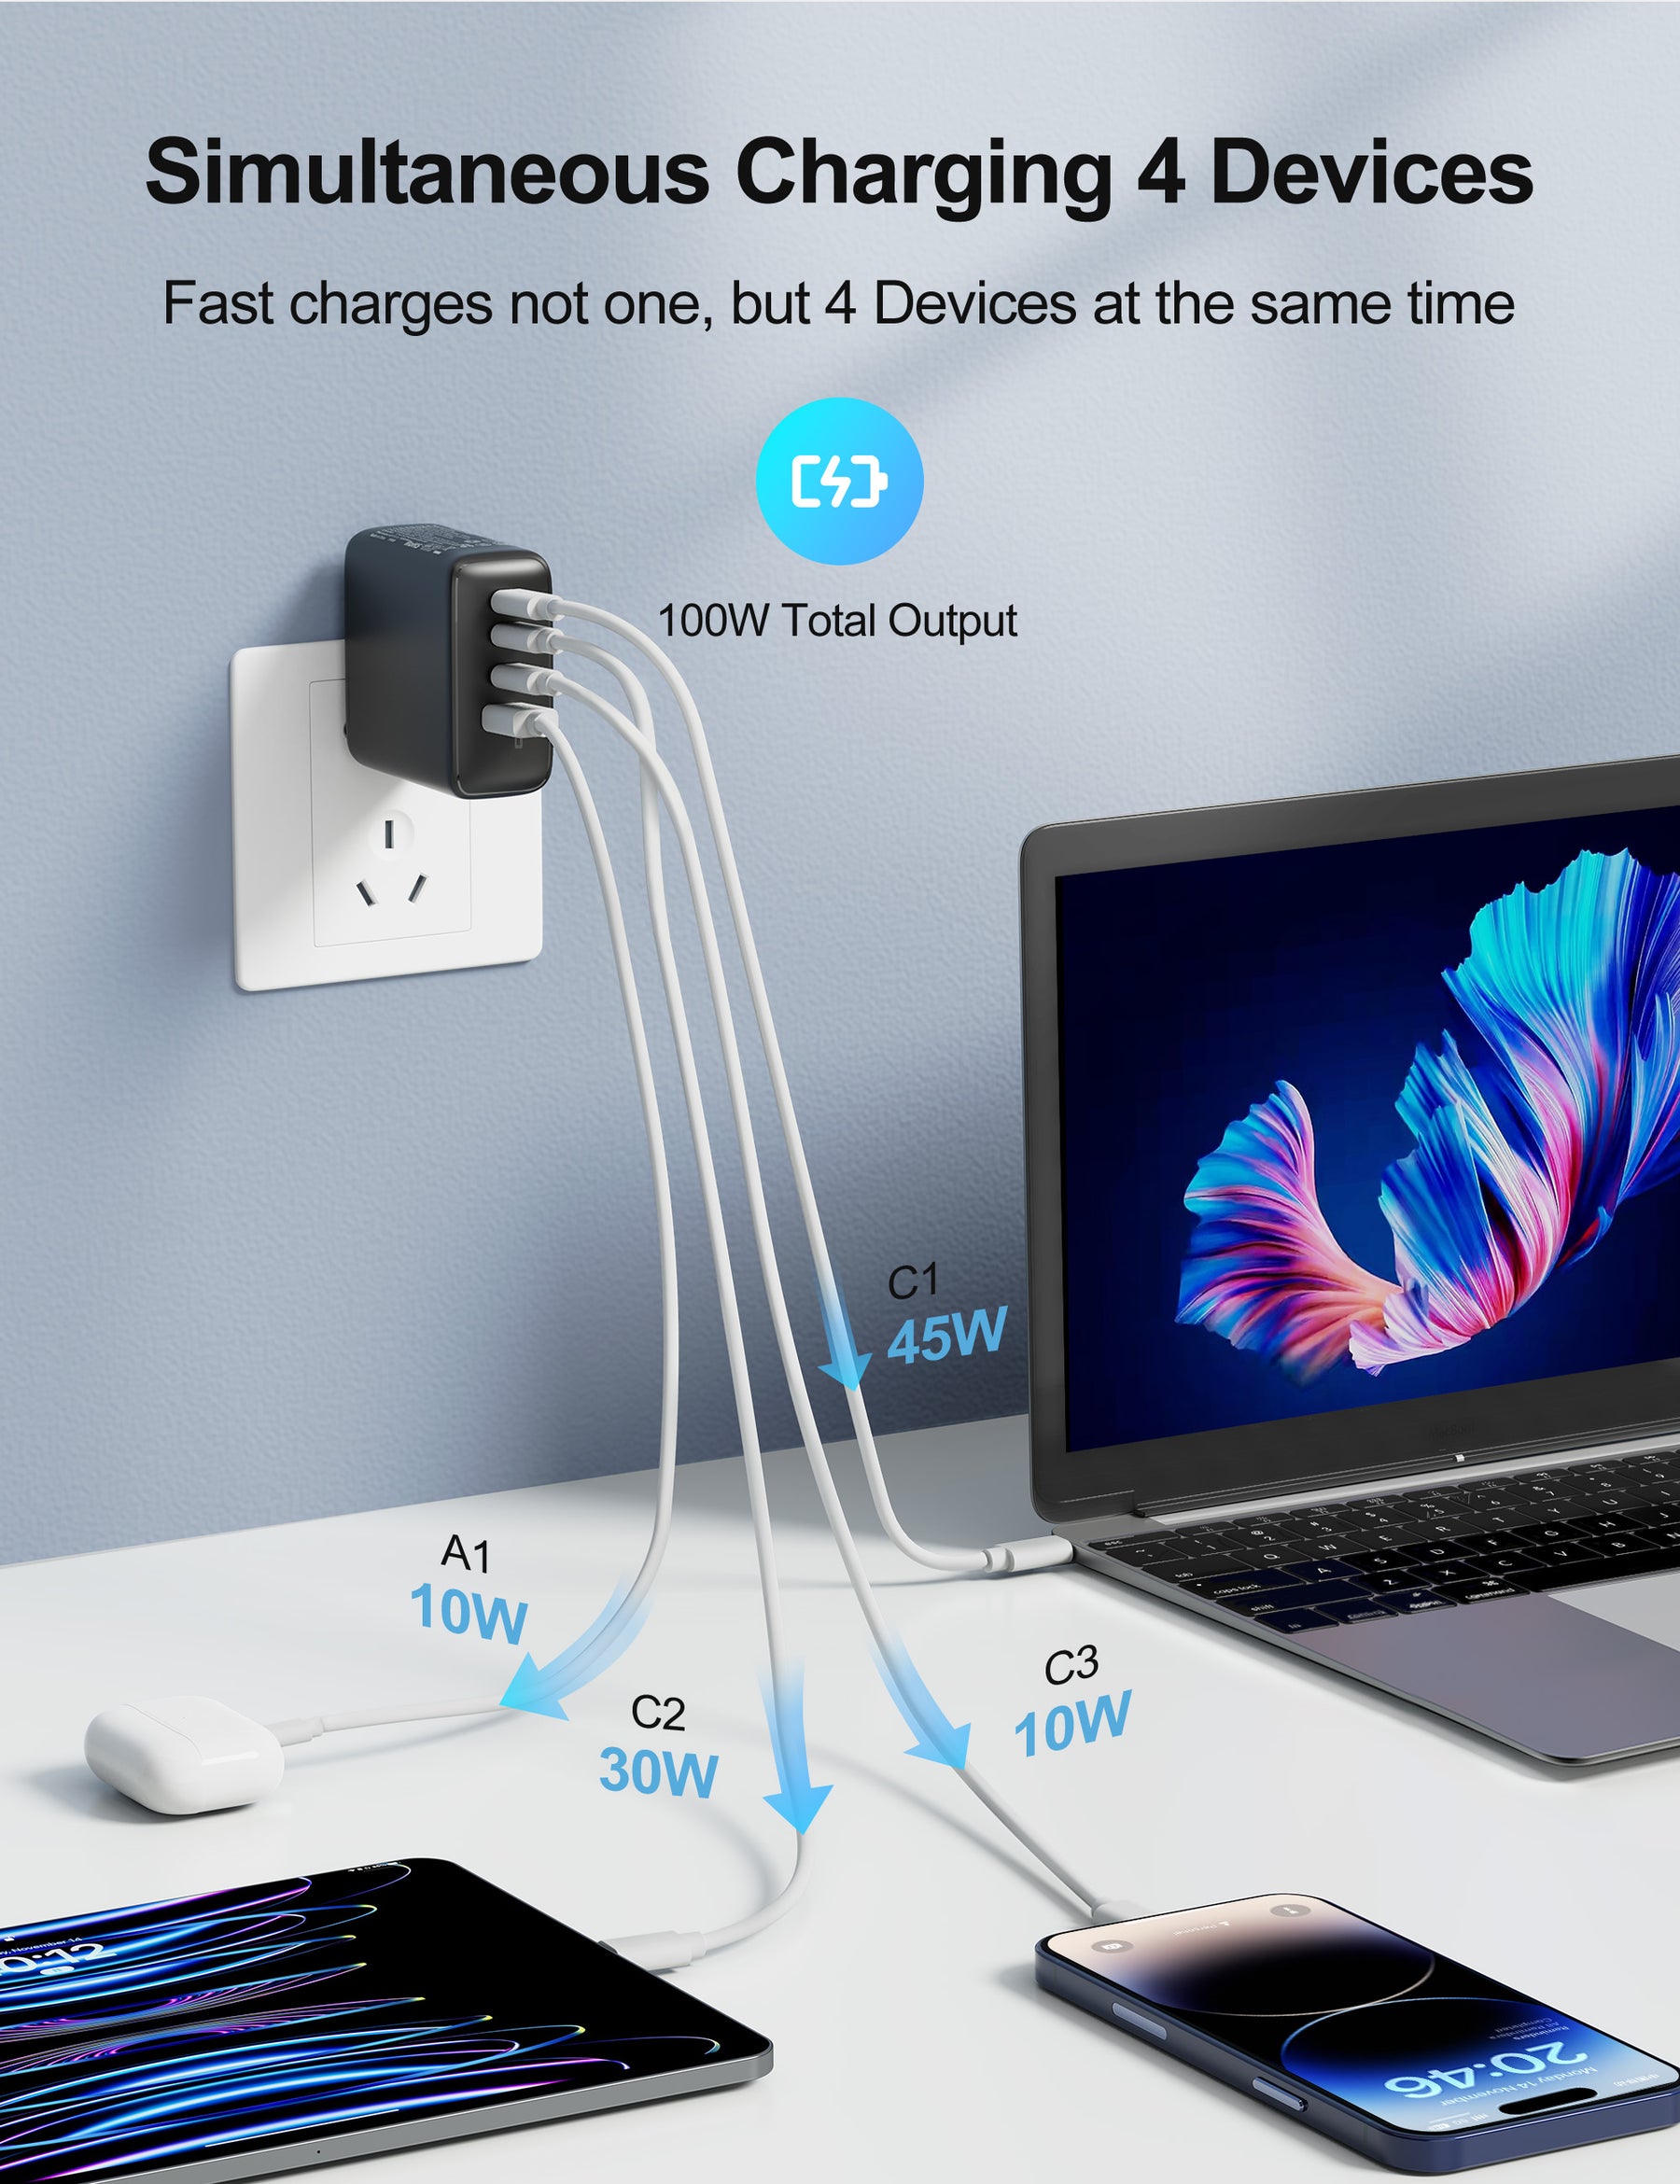 100W USB C Charger Block, Alfox PD 3.0 GaN PPS 4-Port Type C Wall Charger Fast Charging Station Foldable for MacBook Pro Air Google Pixelbook Dell XPS iPad Pro Galaxy S23 iPhone 14 and More Laptops